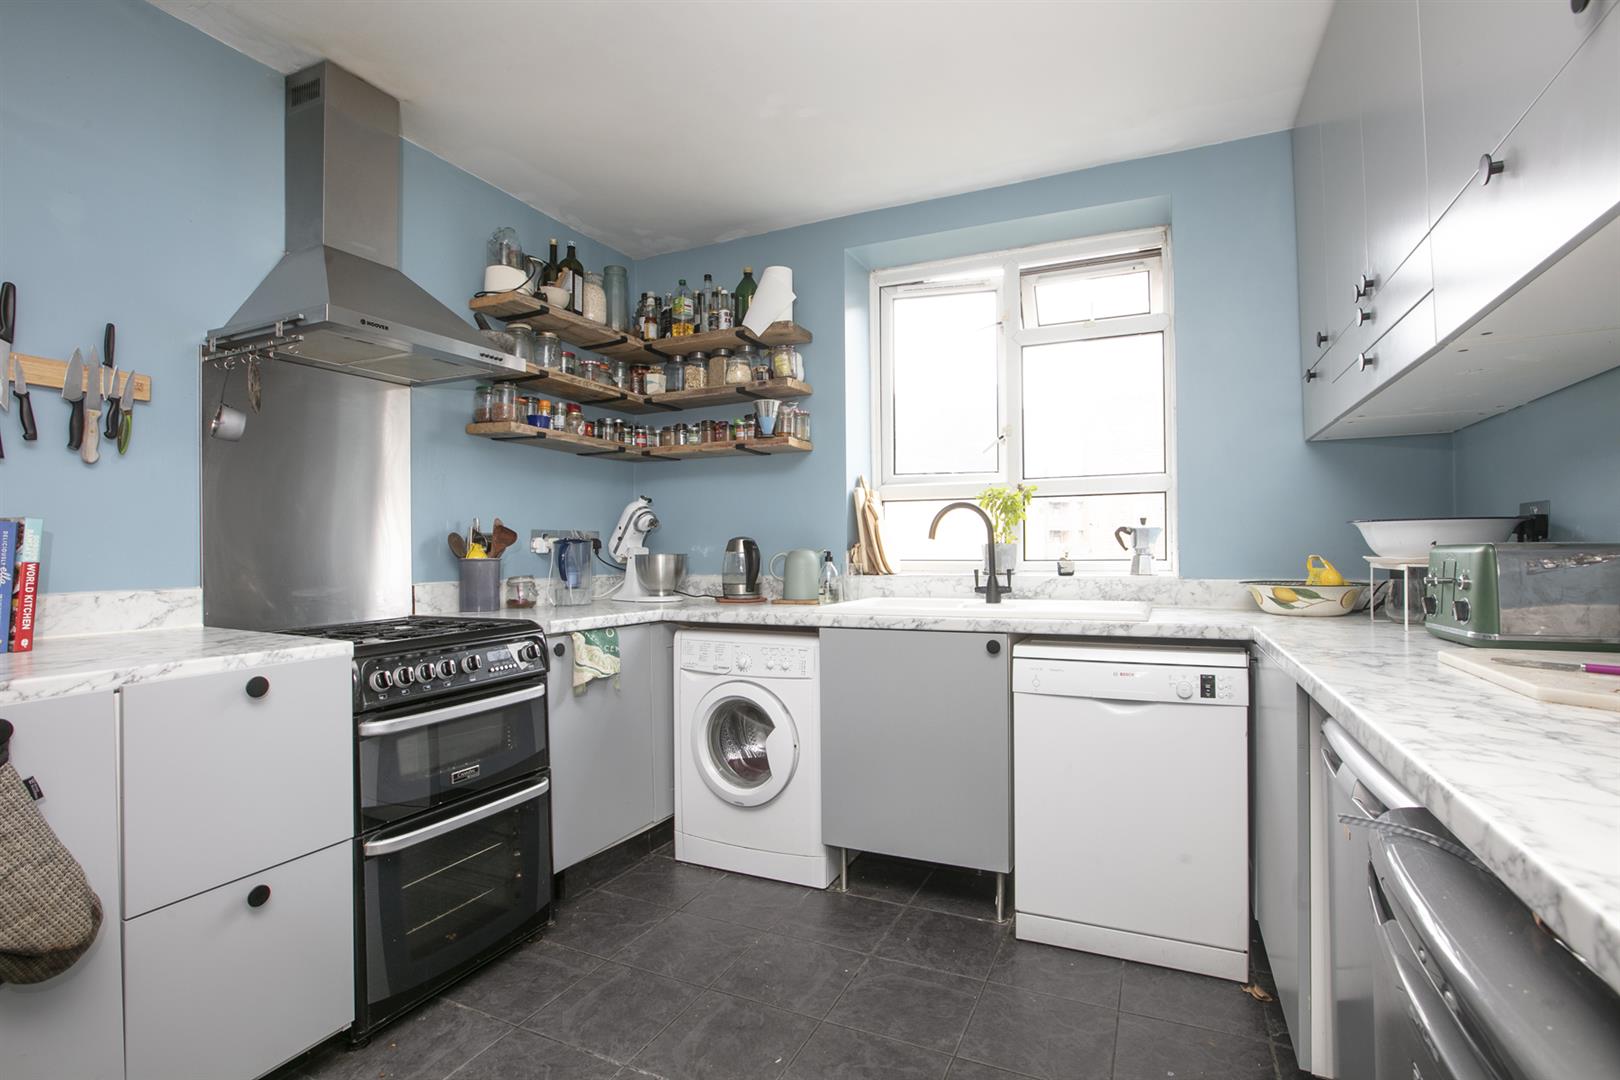 Flat - Purpose Built For Sale in Bonsor Street, Camberwell, SE5 870 view2